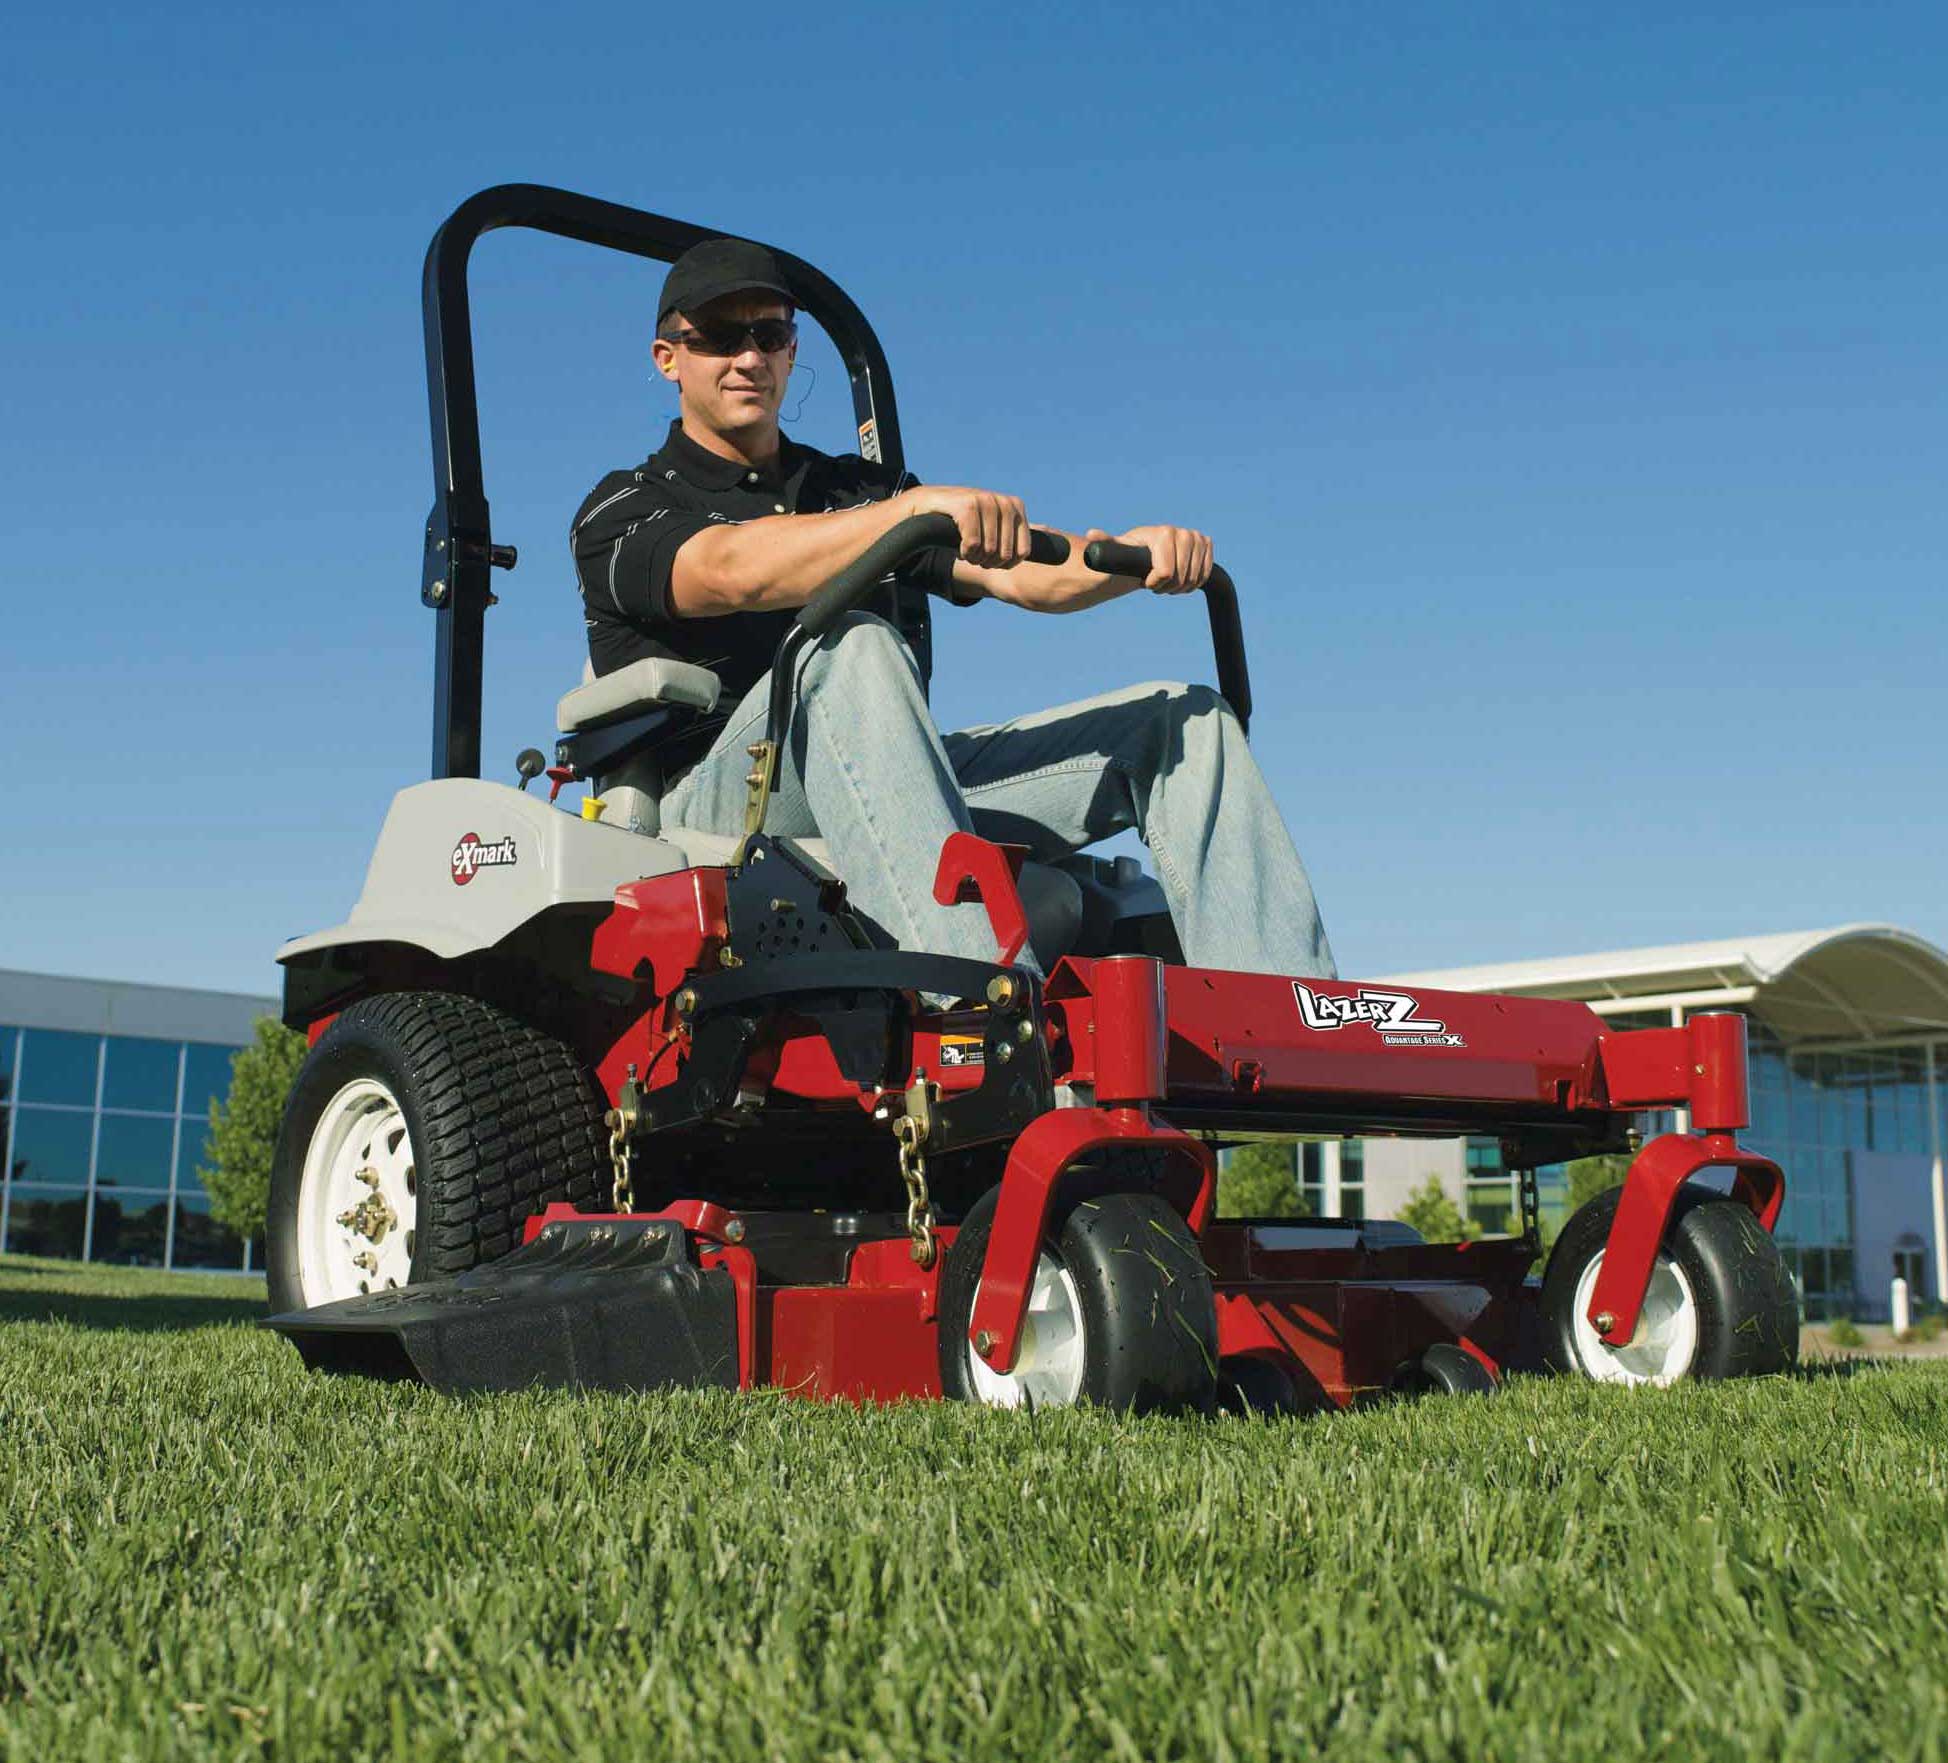 Exmark Manufacturing - The Toro Company strengthens its position in the landscape contractor business with the acquisition of Exmark Manufacturing of Beatrice, Nebraska.